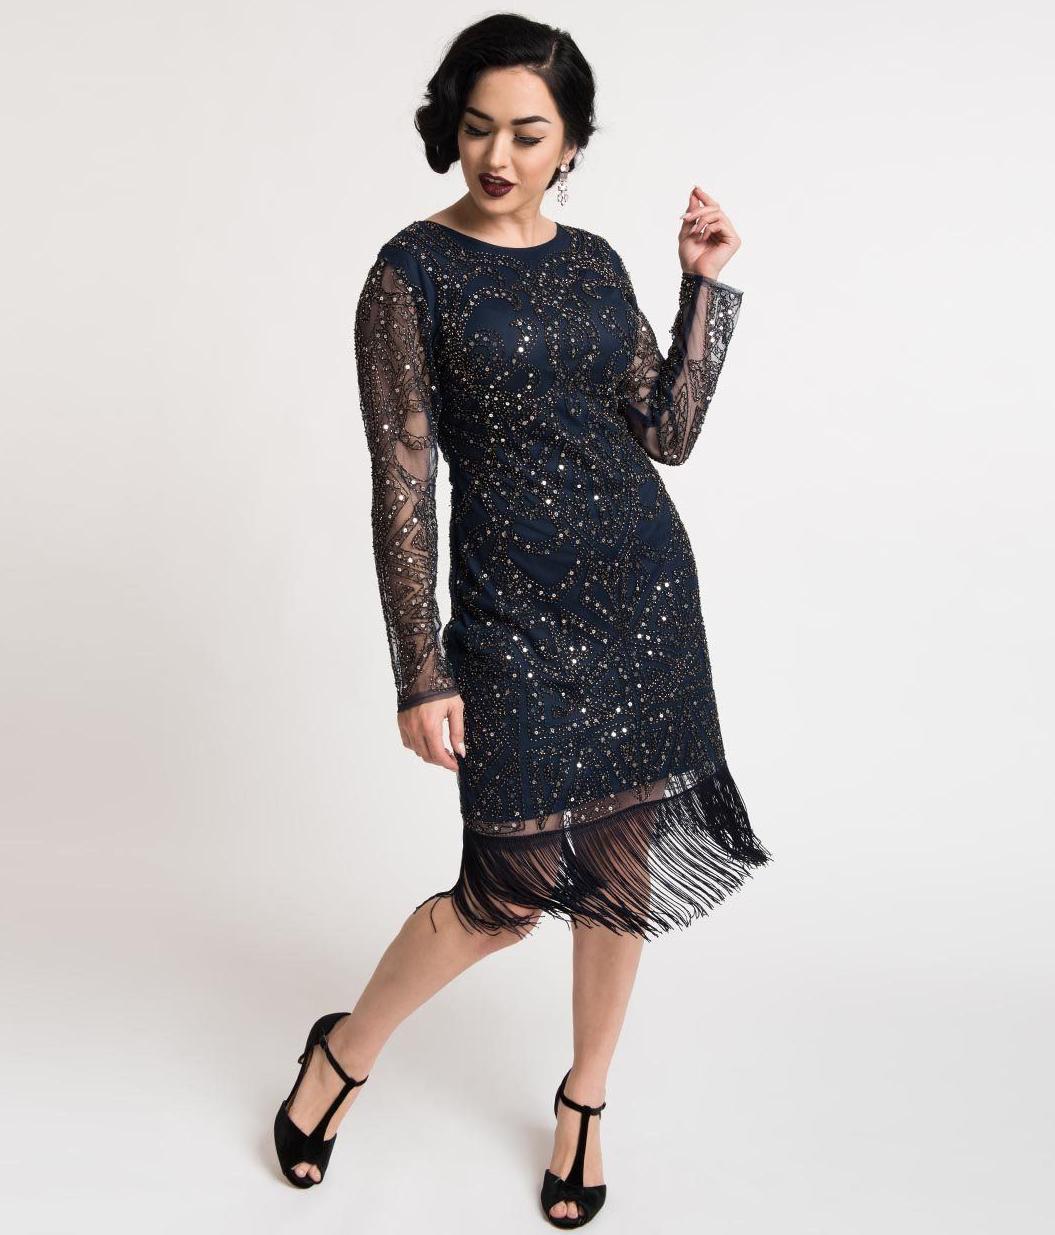 Black Sequin Cocktail Dresses With Sleeves: You Favorite Choice For Special Events 2022